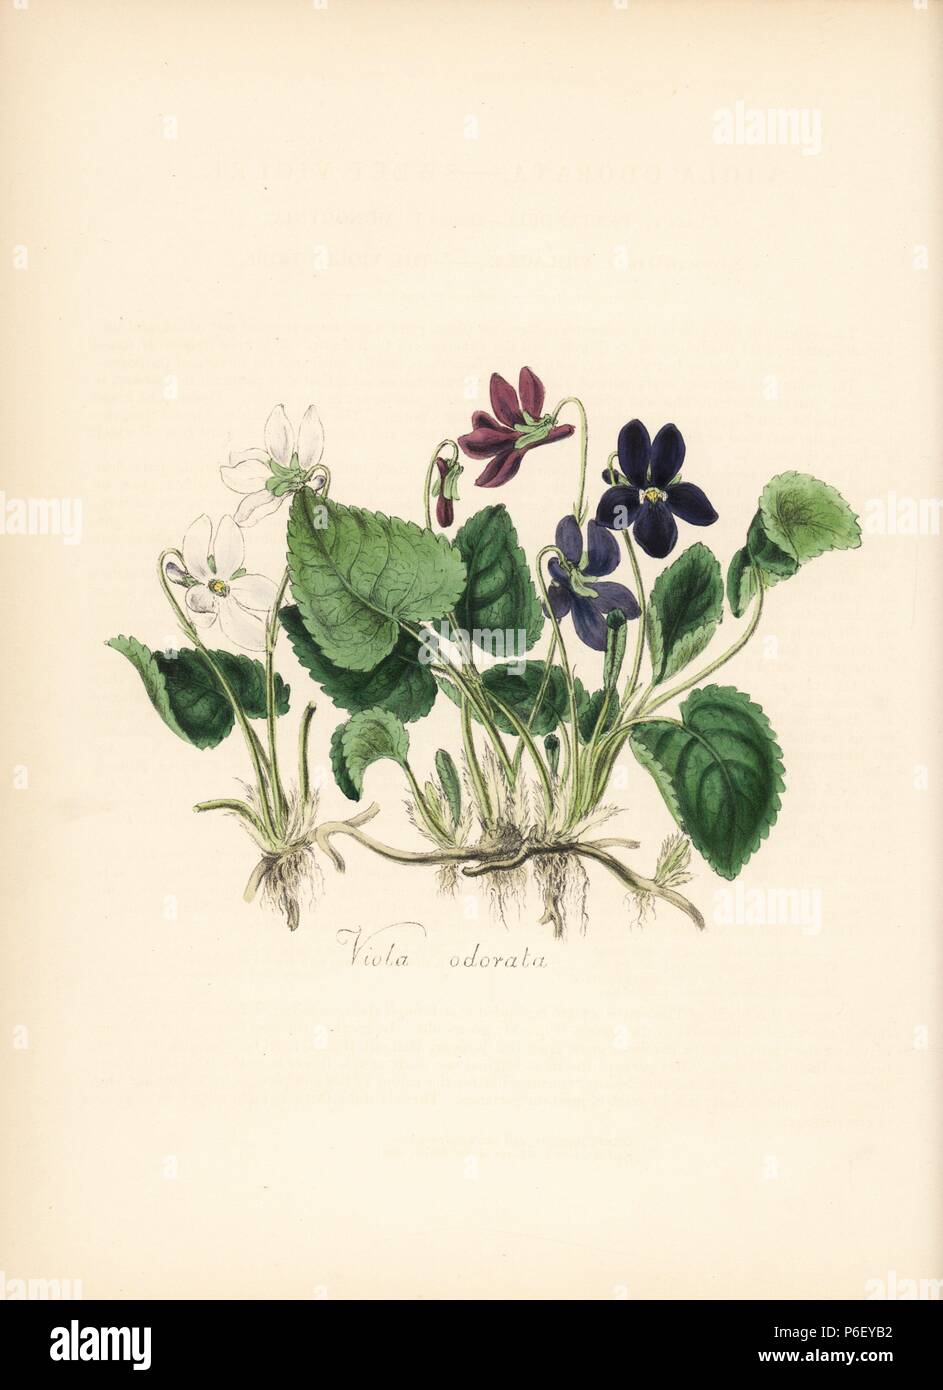 Sweet violet, Viola odorata. Handcoloured zincograph by Chabots drawn by Miss M. A. Burnett from her 'Plantae Utiliores: or Illustrations of Useful Plants,' Whittaker, London, 1842. Miss Burnett drew the botanical illustrations, but the text was chiefly by her late brother, British botanist Gilbert Thomas Burnett (1800-1835). Stock Photo